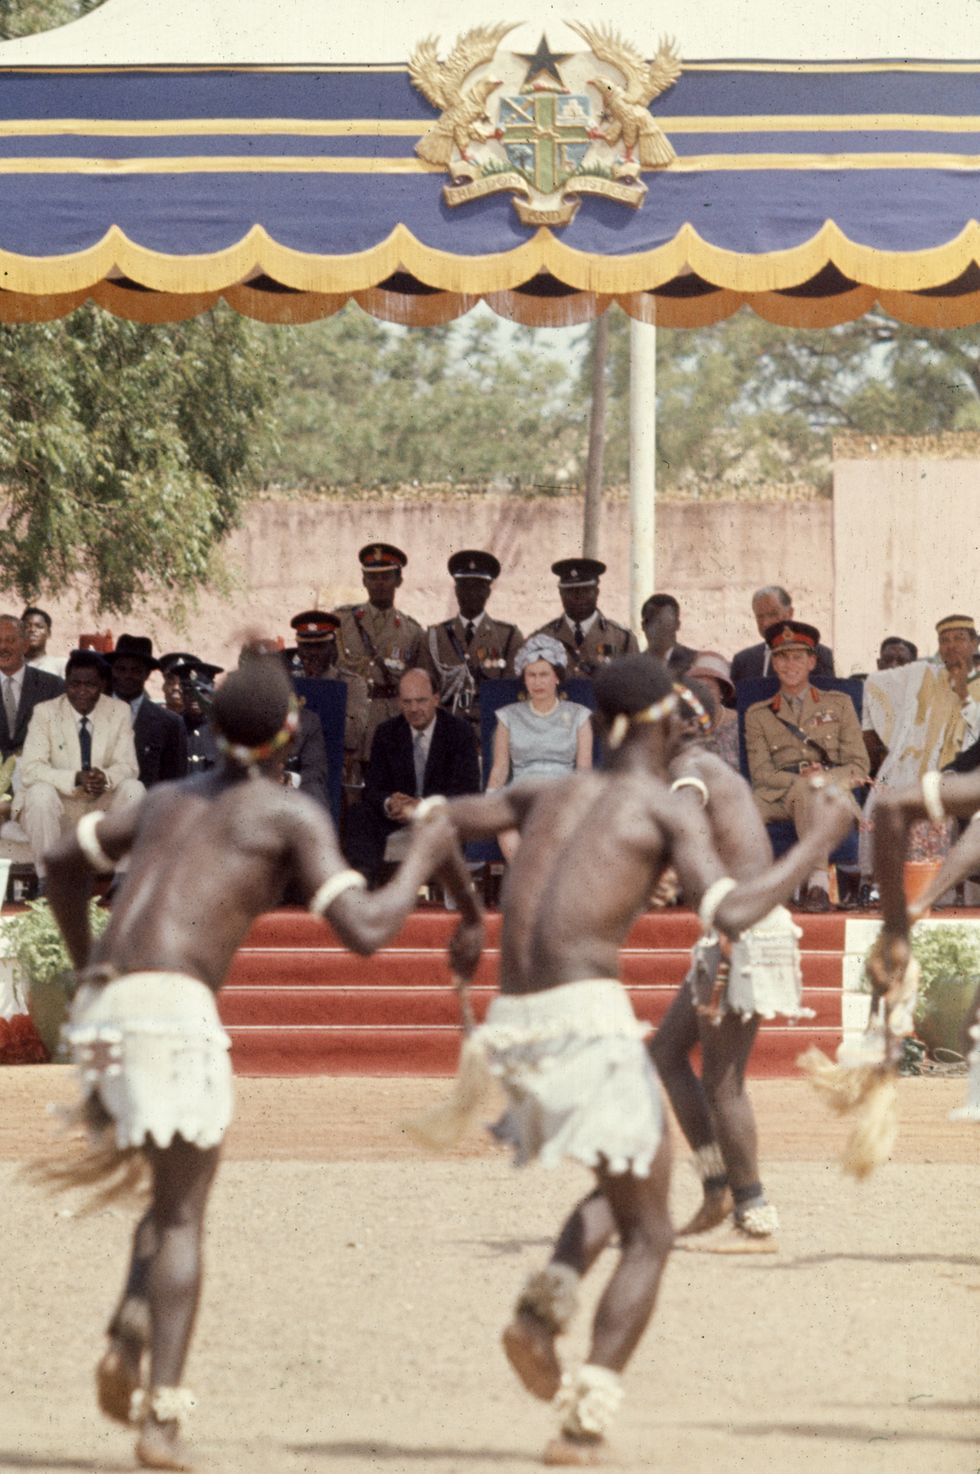 Queen Elizabeth II watches a dance performance in an outdoor parade ground, Tamale, Ghana, November 12, 1961